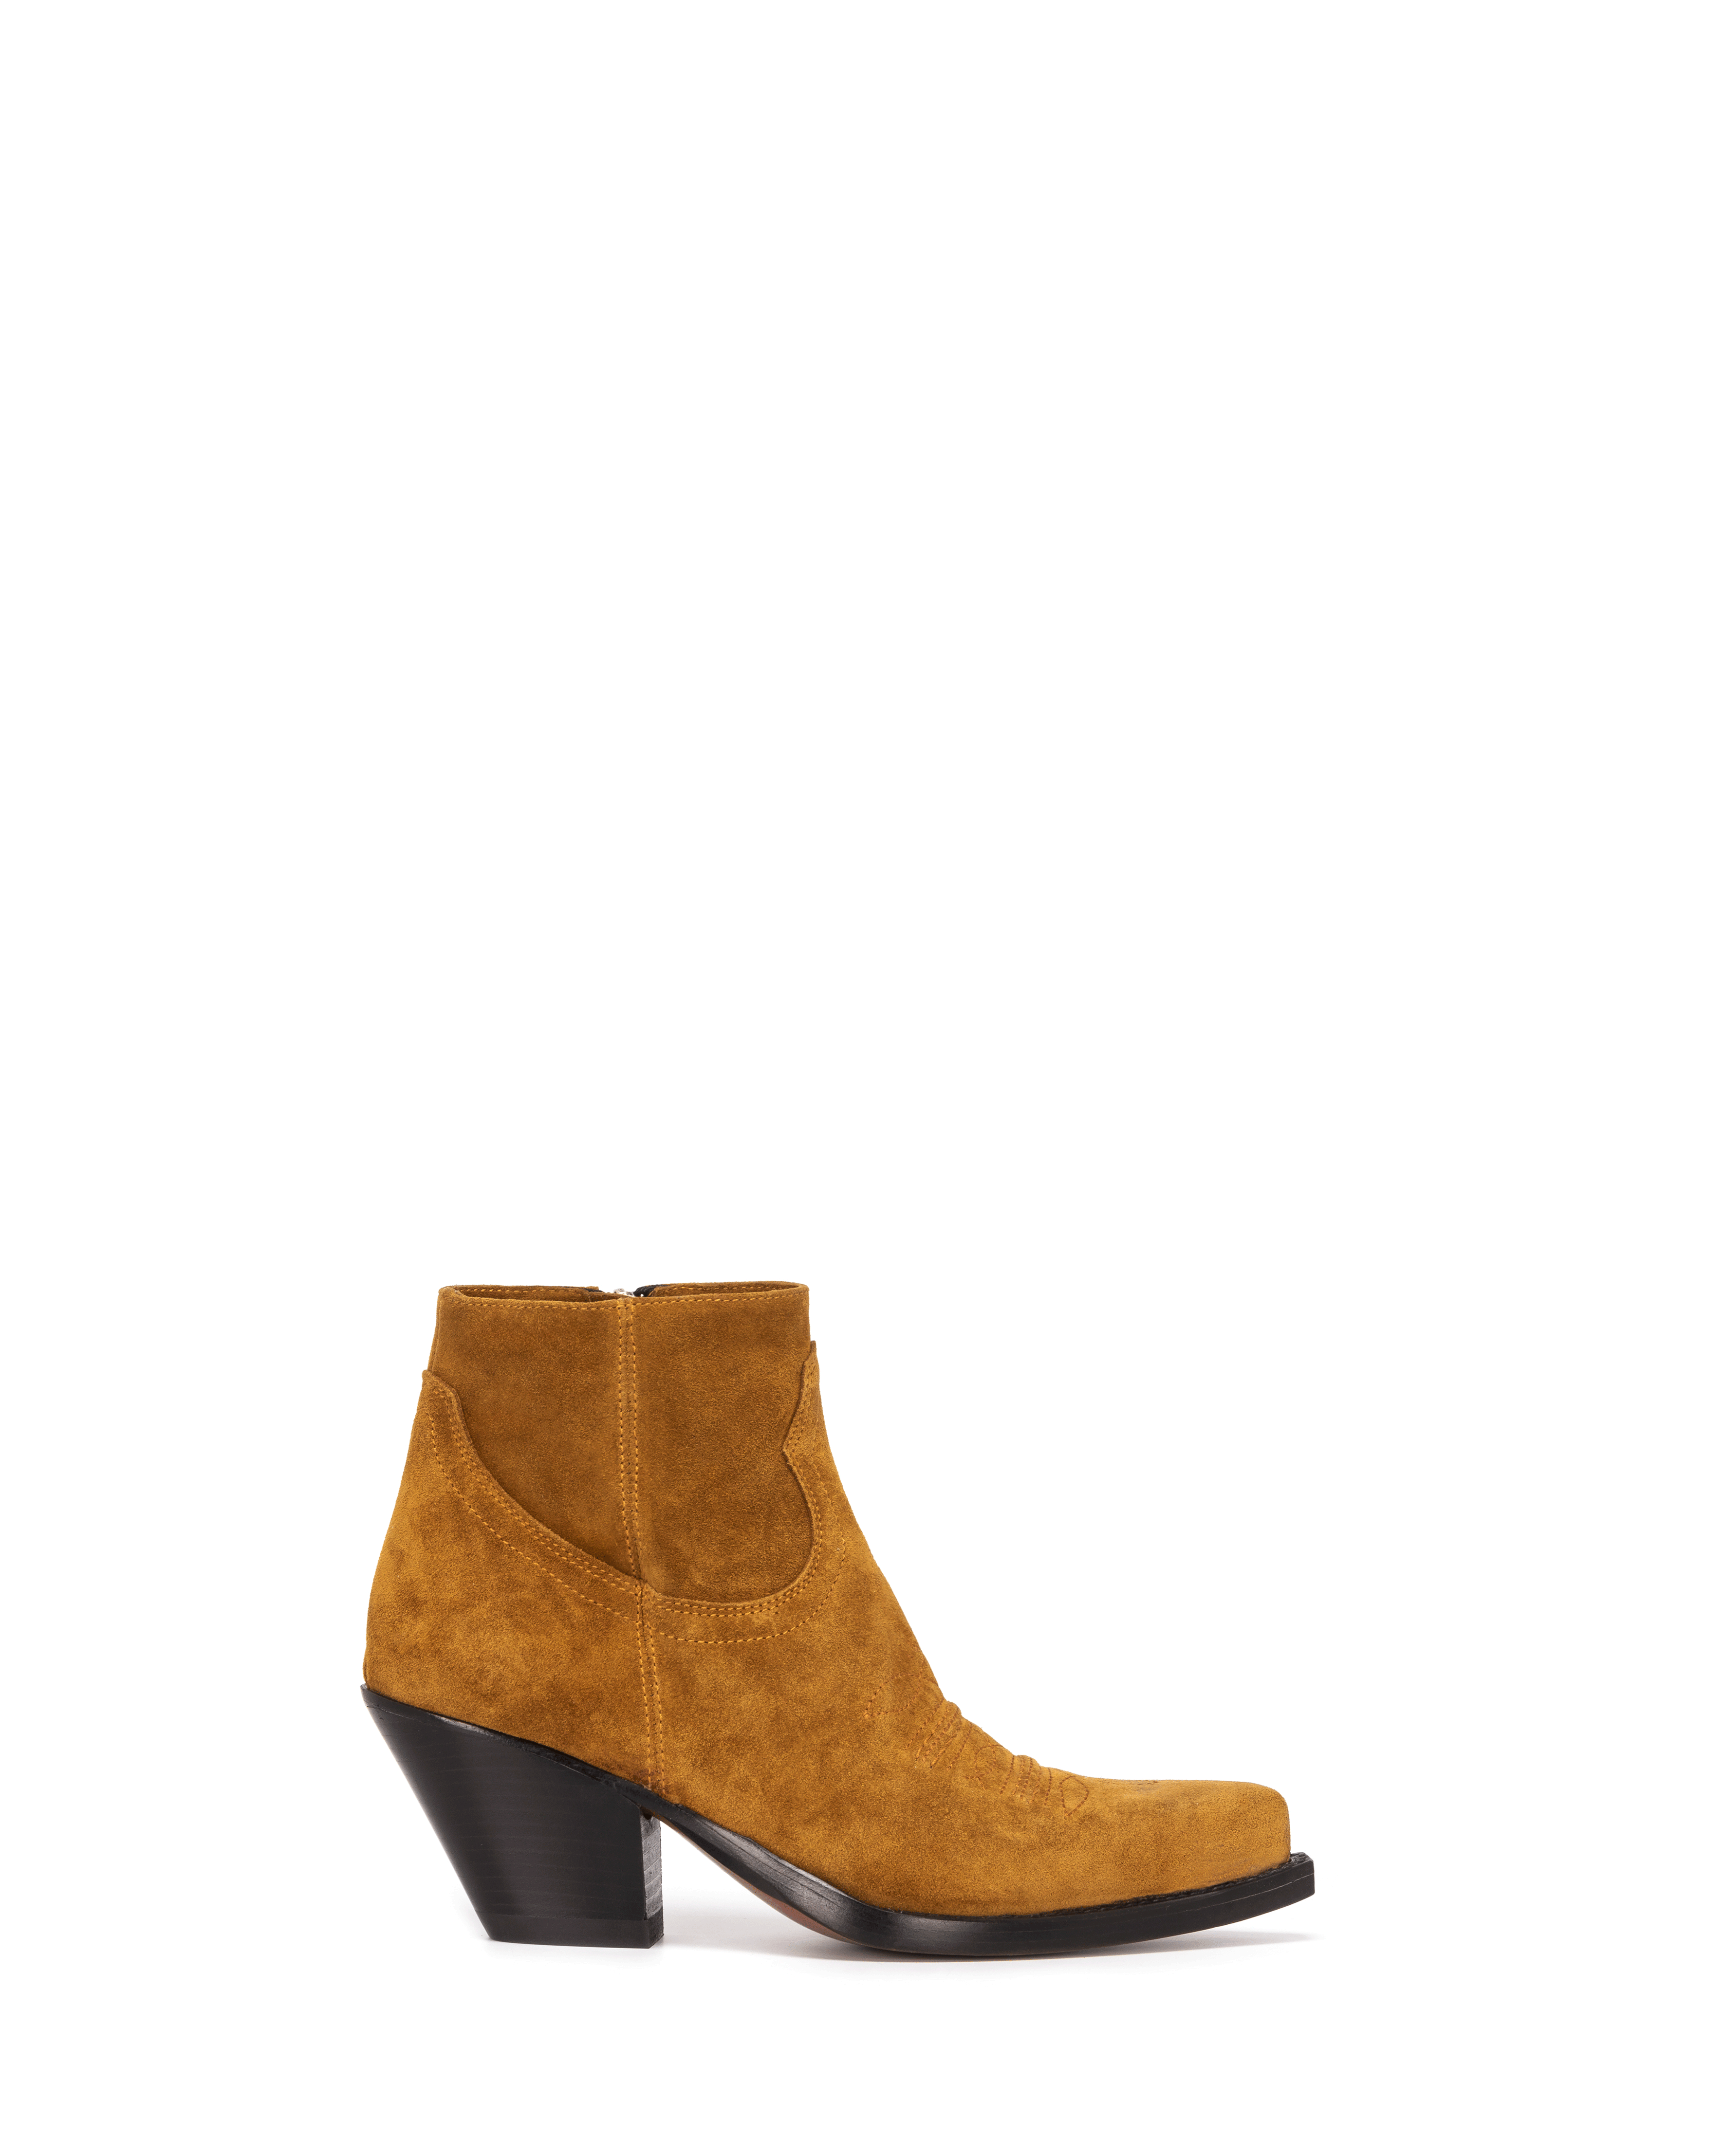 JALAPENO Women's Ankle Boots in Cigar Suede Oil | Ecru Embroidery